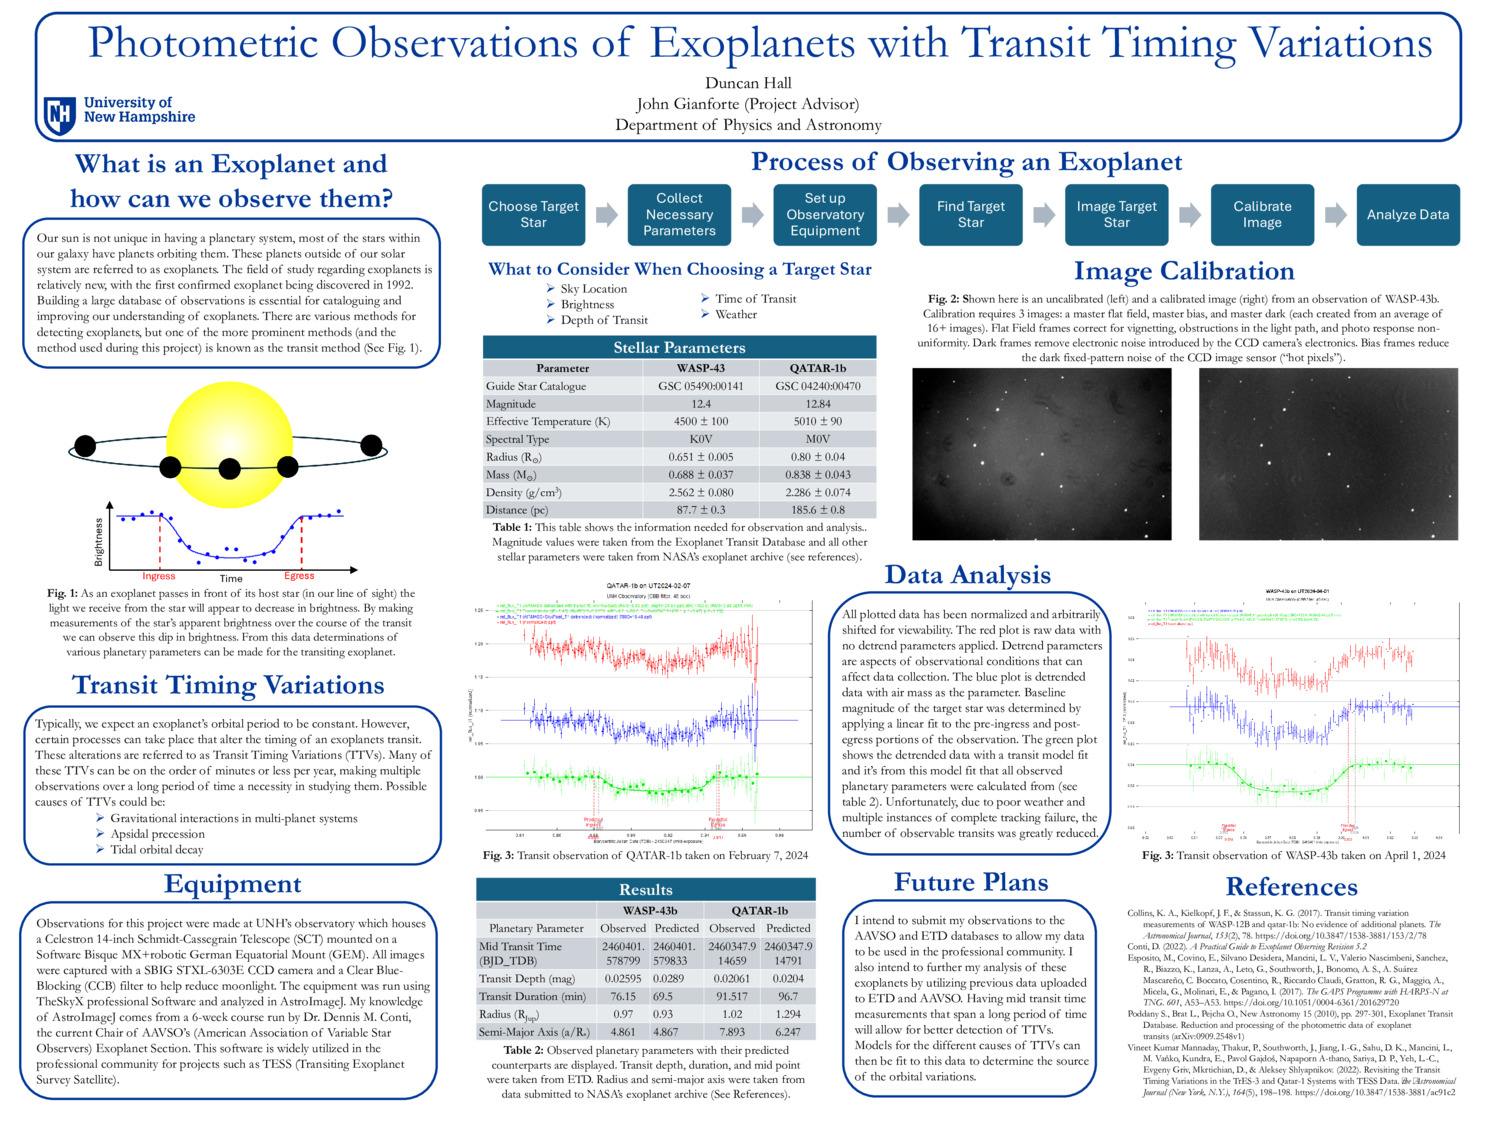 Photometric Observations Of Exoplanets With Transit Timing Variations by dh1087